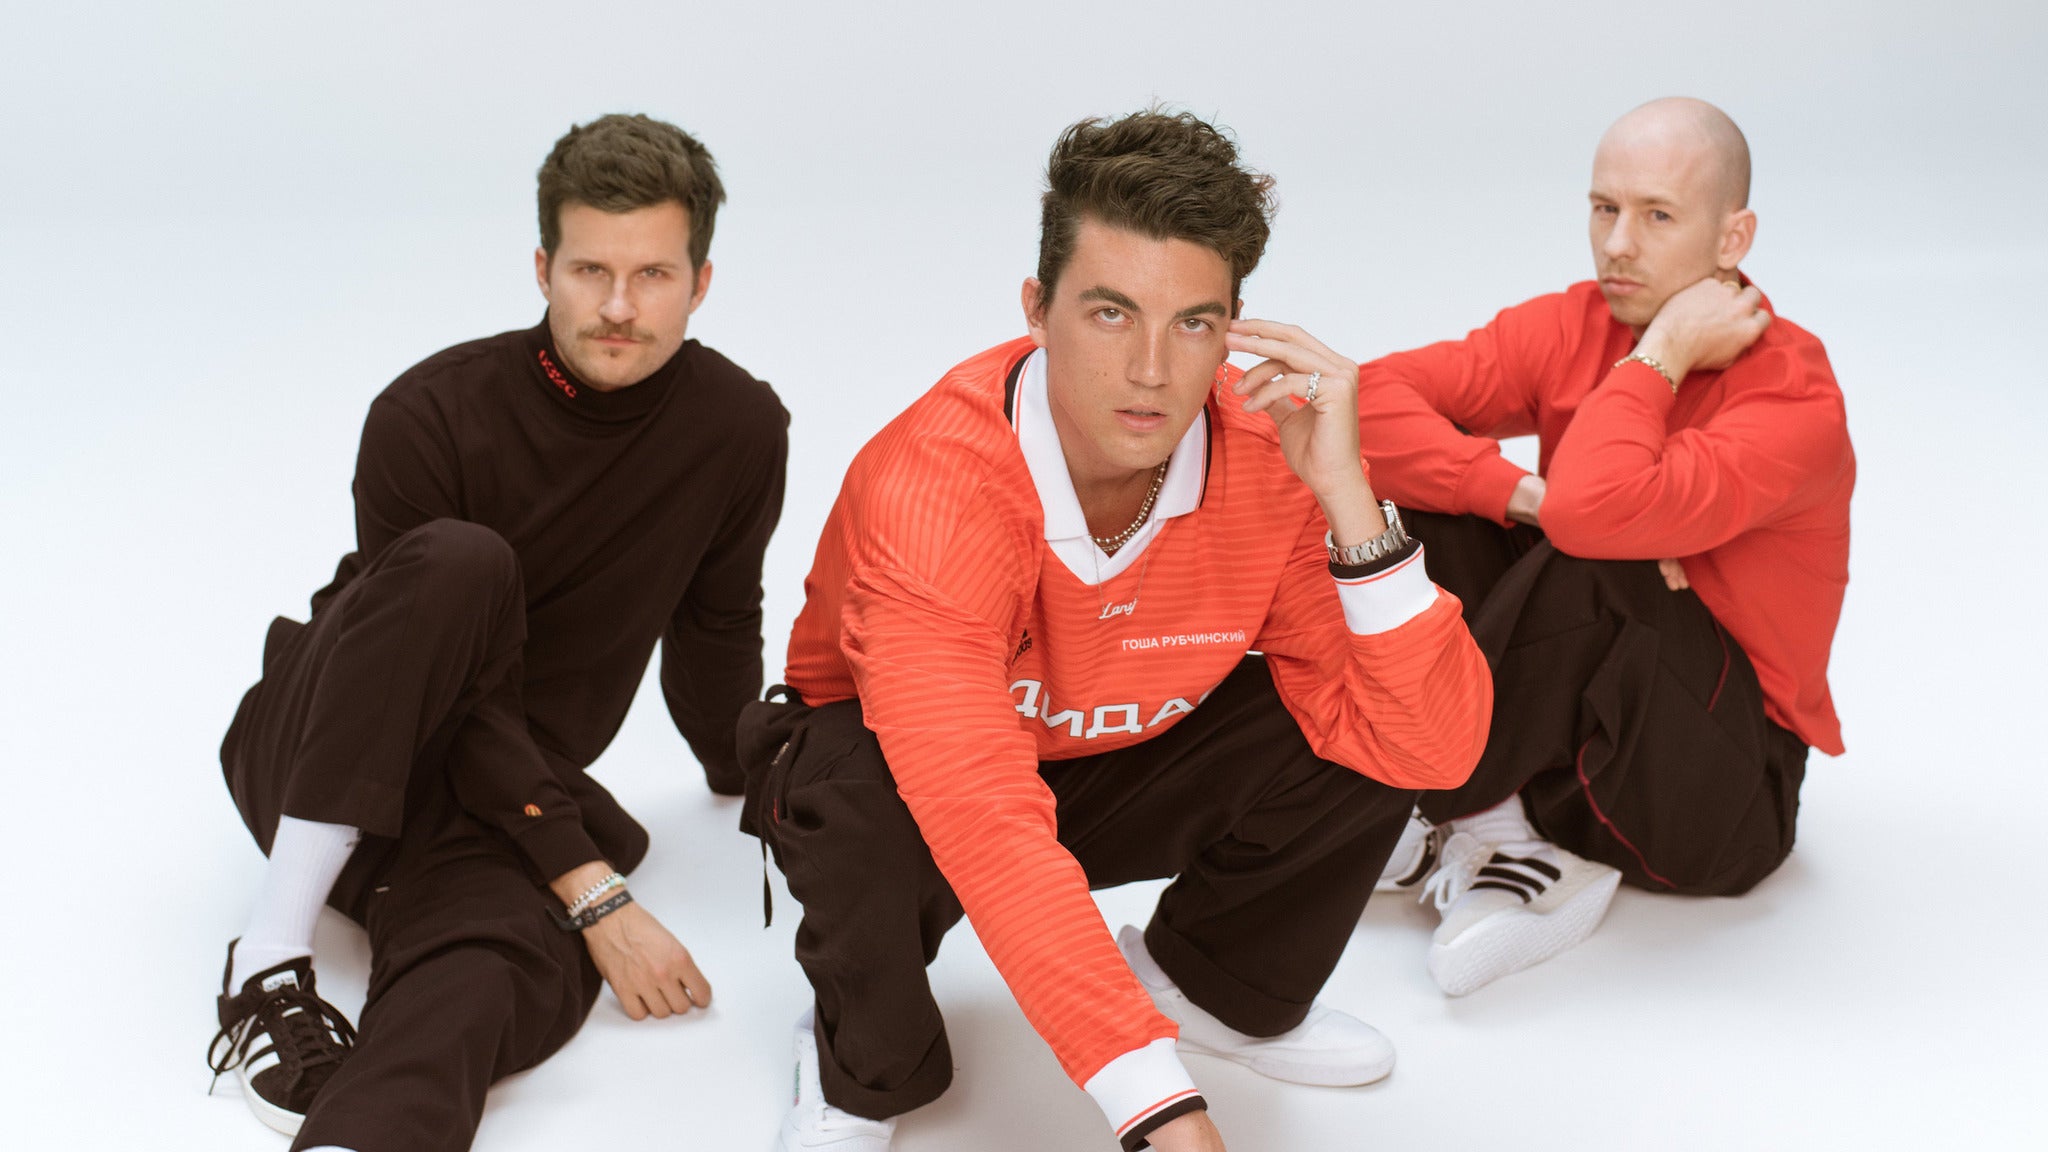 The LANY tour. in Cincinnati promo photo for Spotify presale offer code